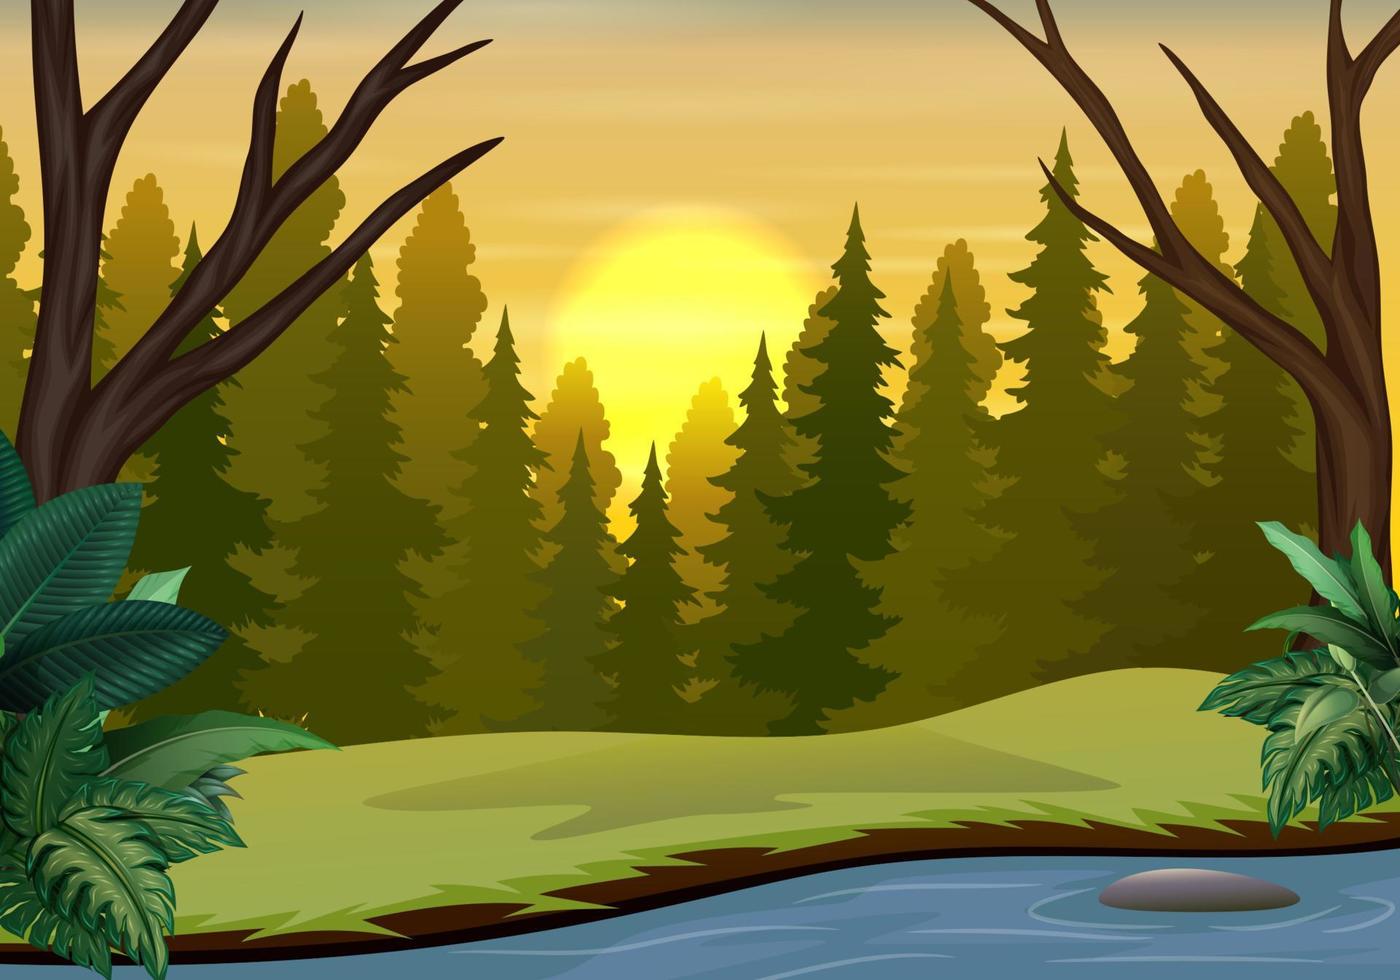 Forest landscape on sunset scene with dry trees vector